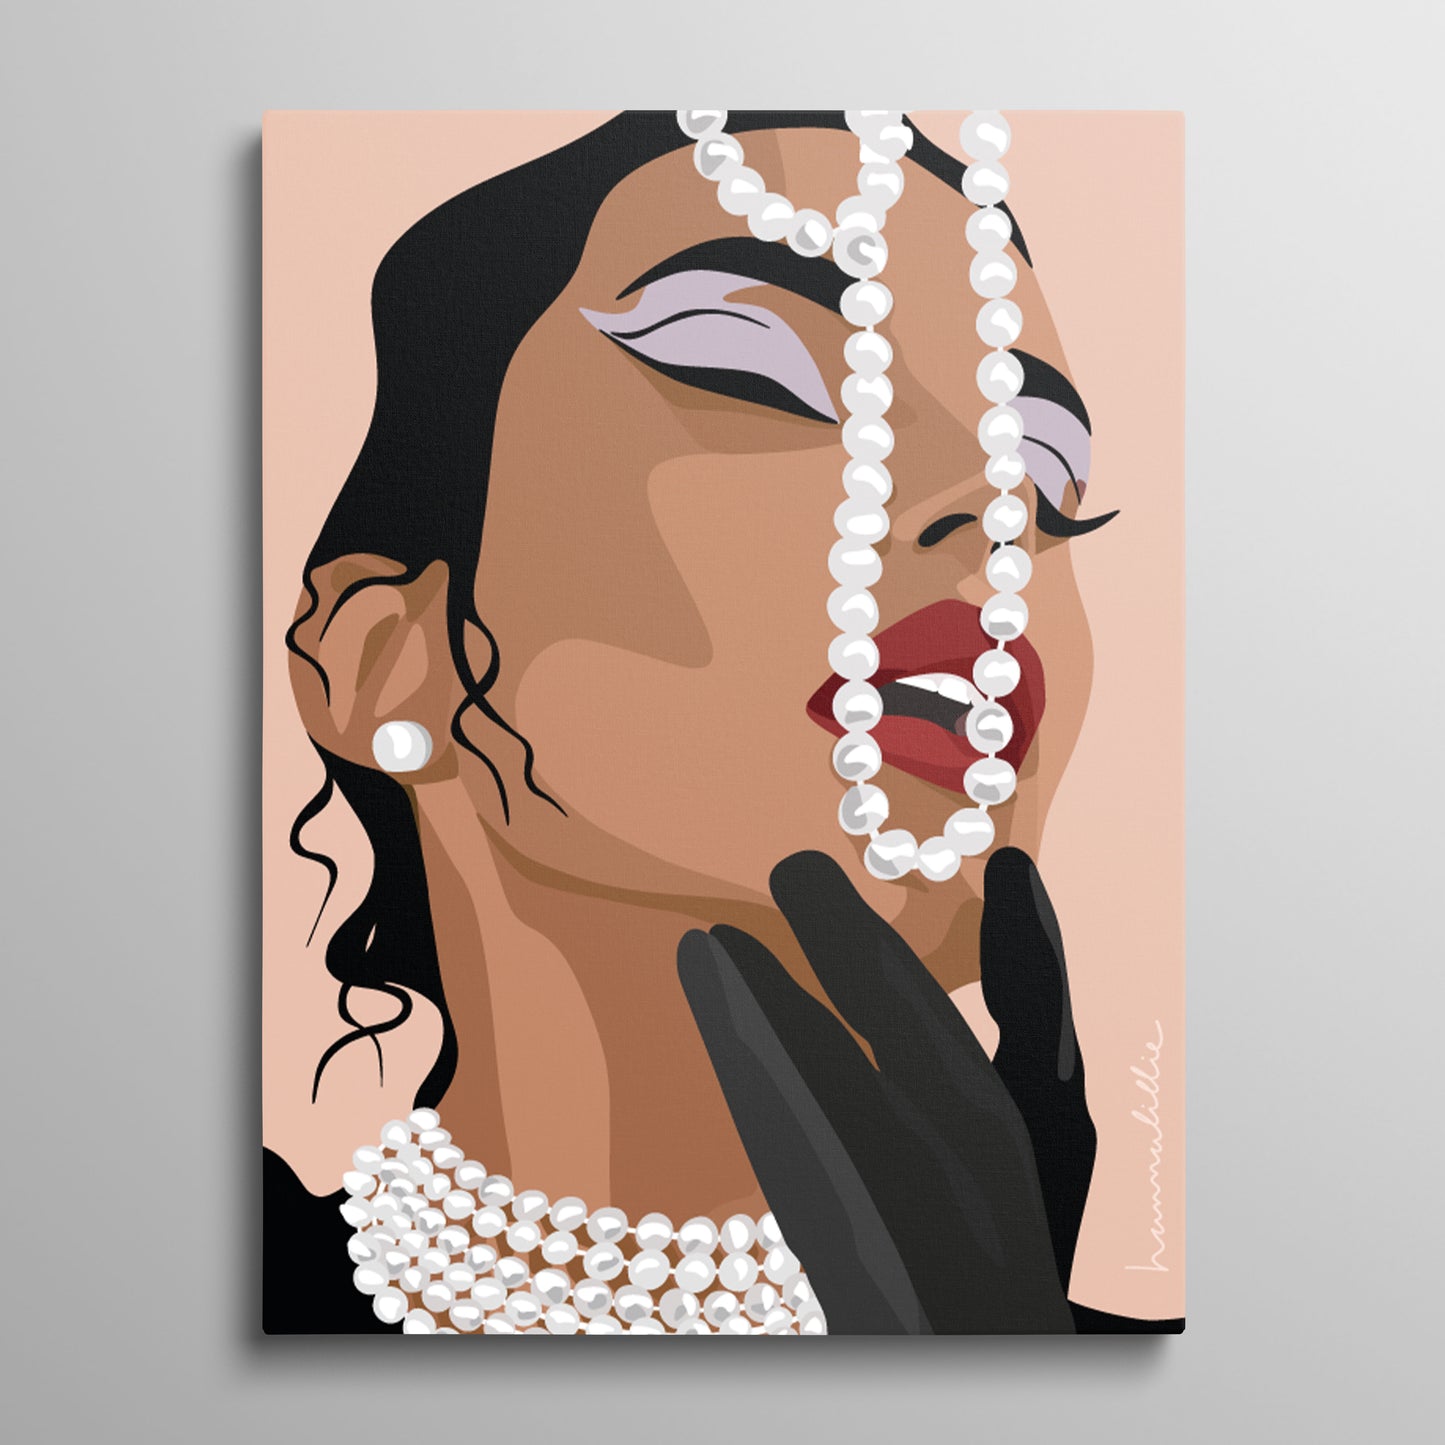 Claire Pearls of Joy - art print canvas